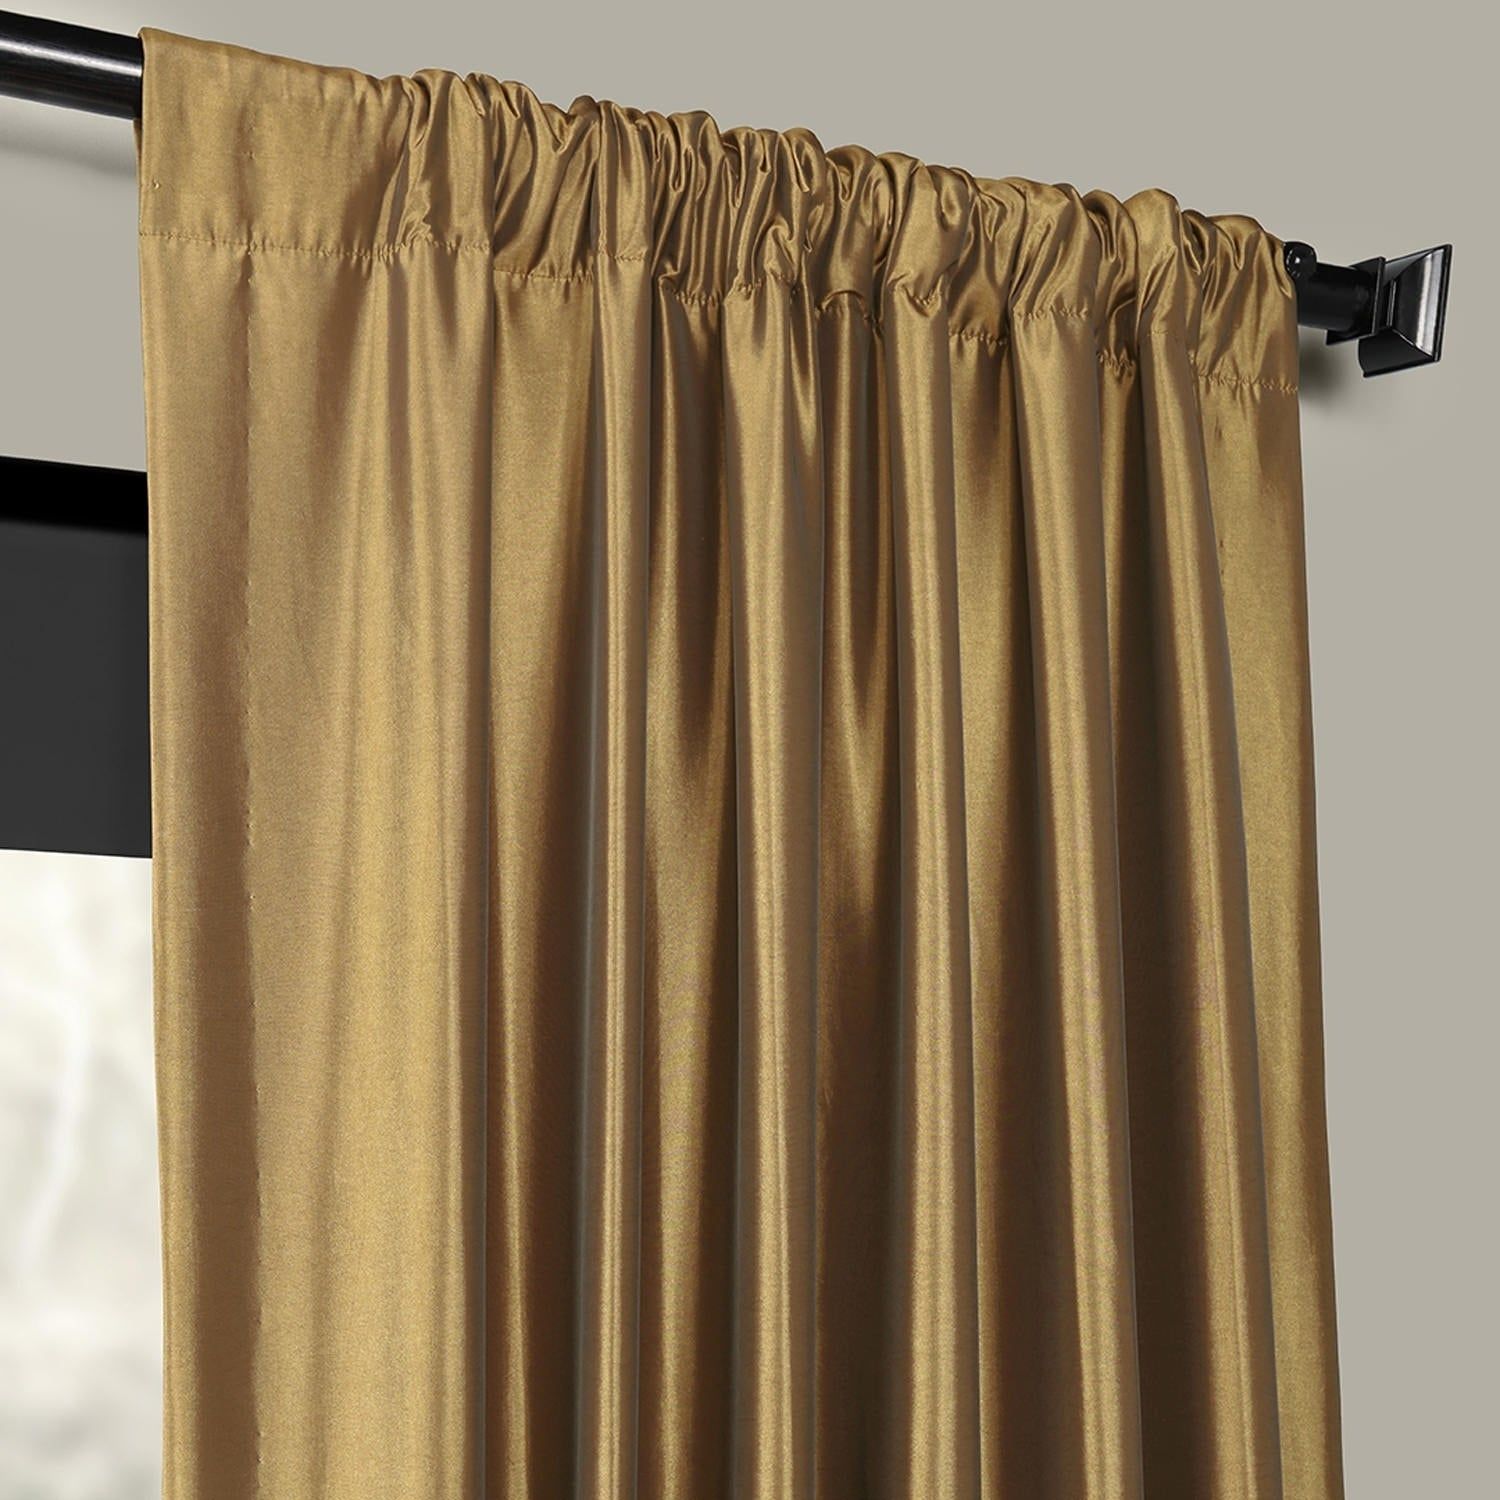 Exclusive Fabrics Gold Nugget Faux Silk Taffeta Curtain Panel Pertaining To Flax Gold Vintage Faux Textured Silk Single Curtain Panels (View 13 of 20)